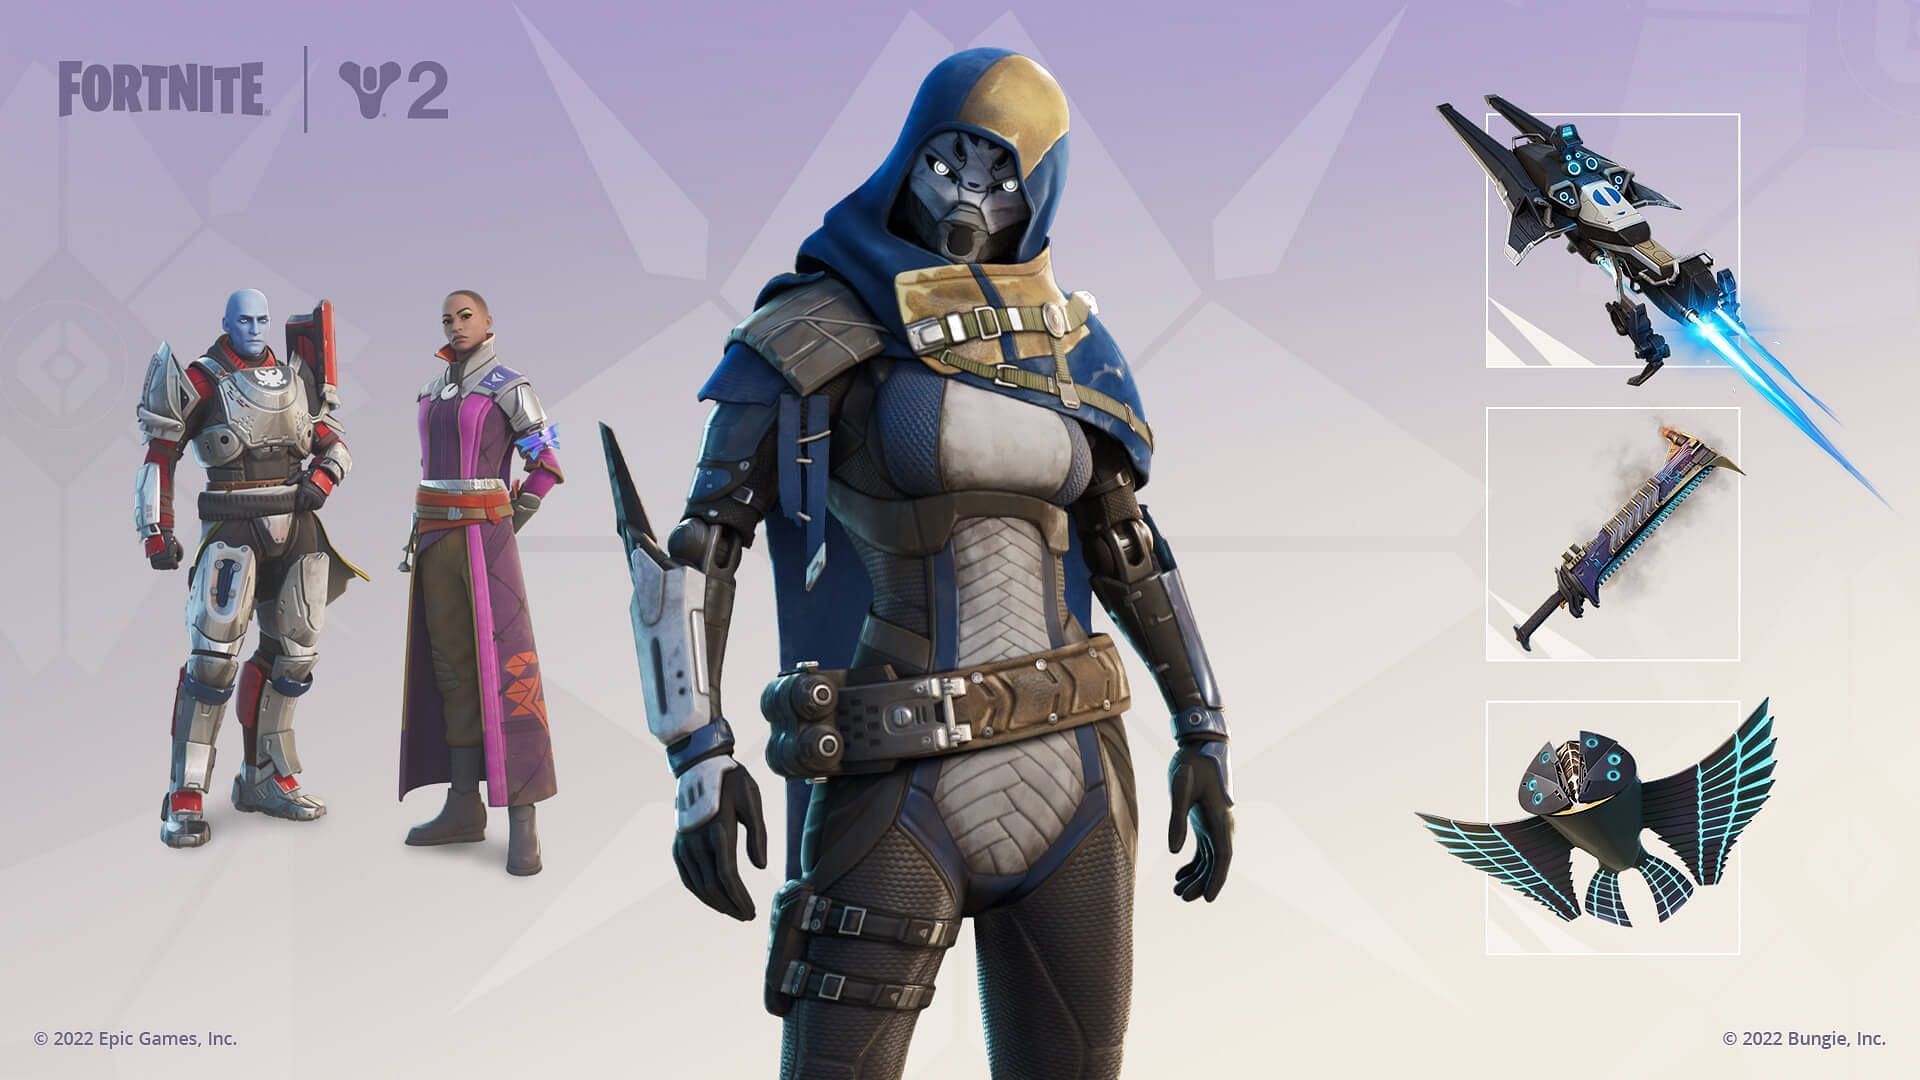 Exo Stranger is available for purchase from the Fortnite Item Shop (Image via Epic Games)